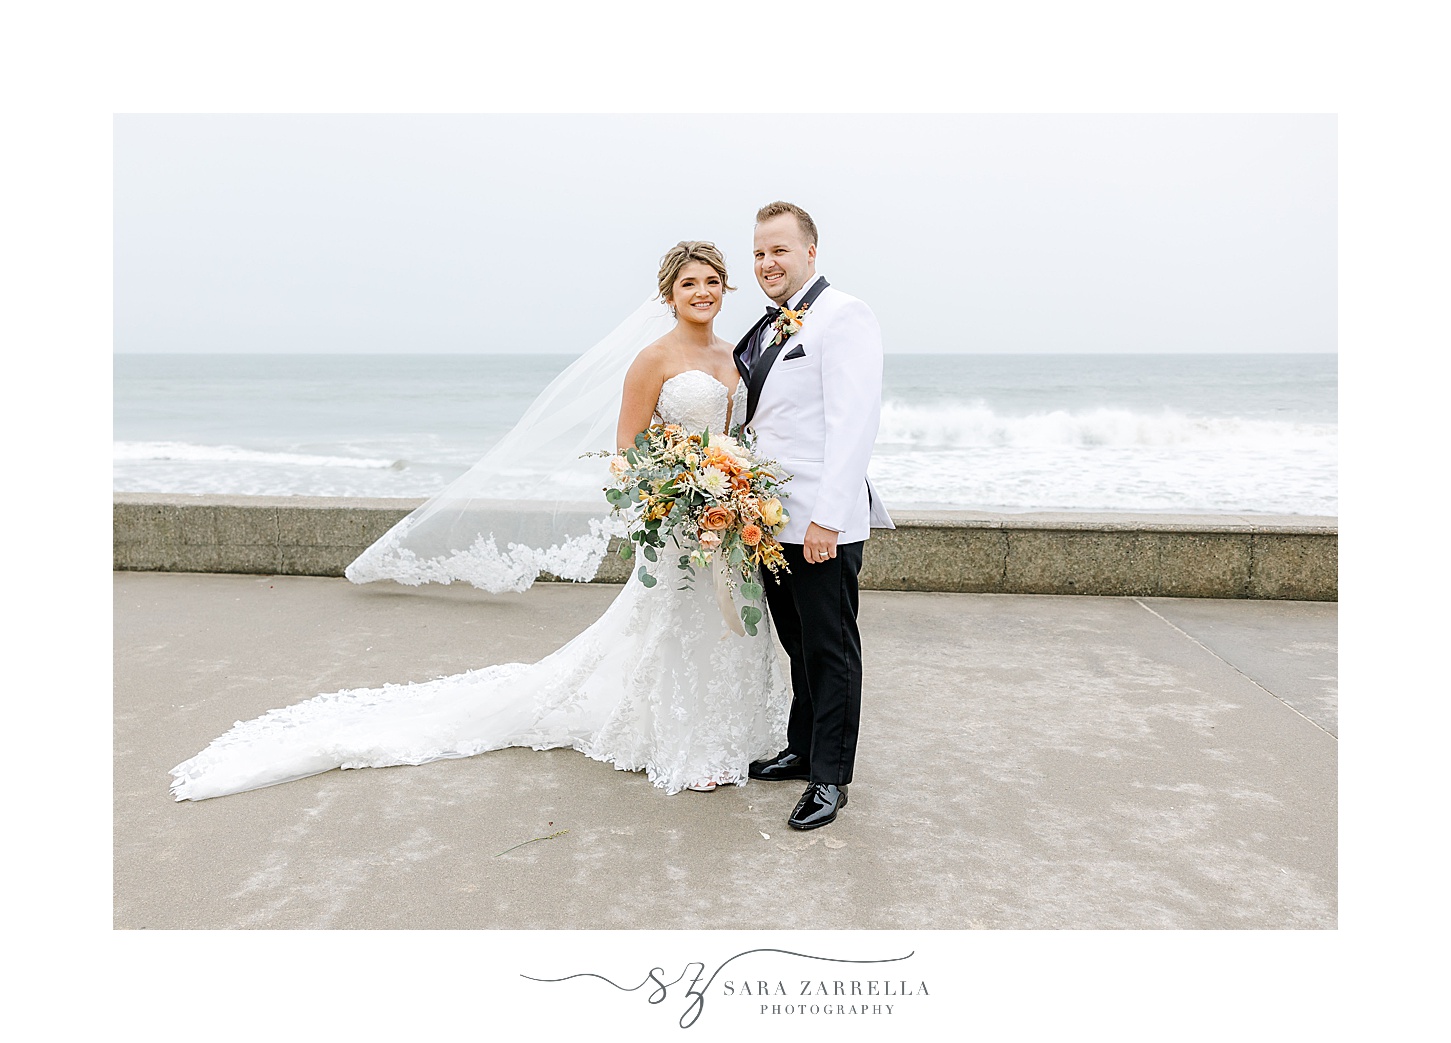 newlyweds hug with bride's veil floating behind them at beachfront in Westerly RI